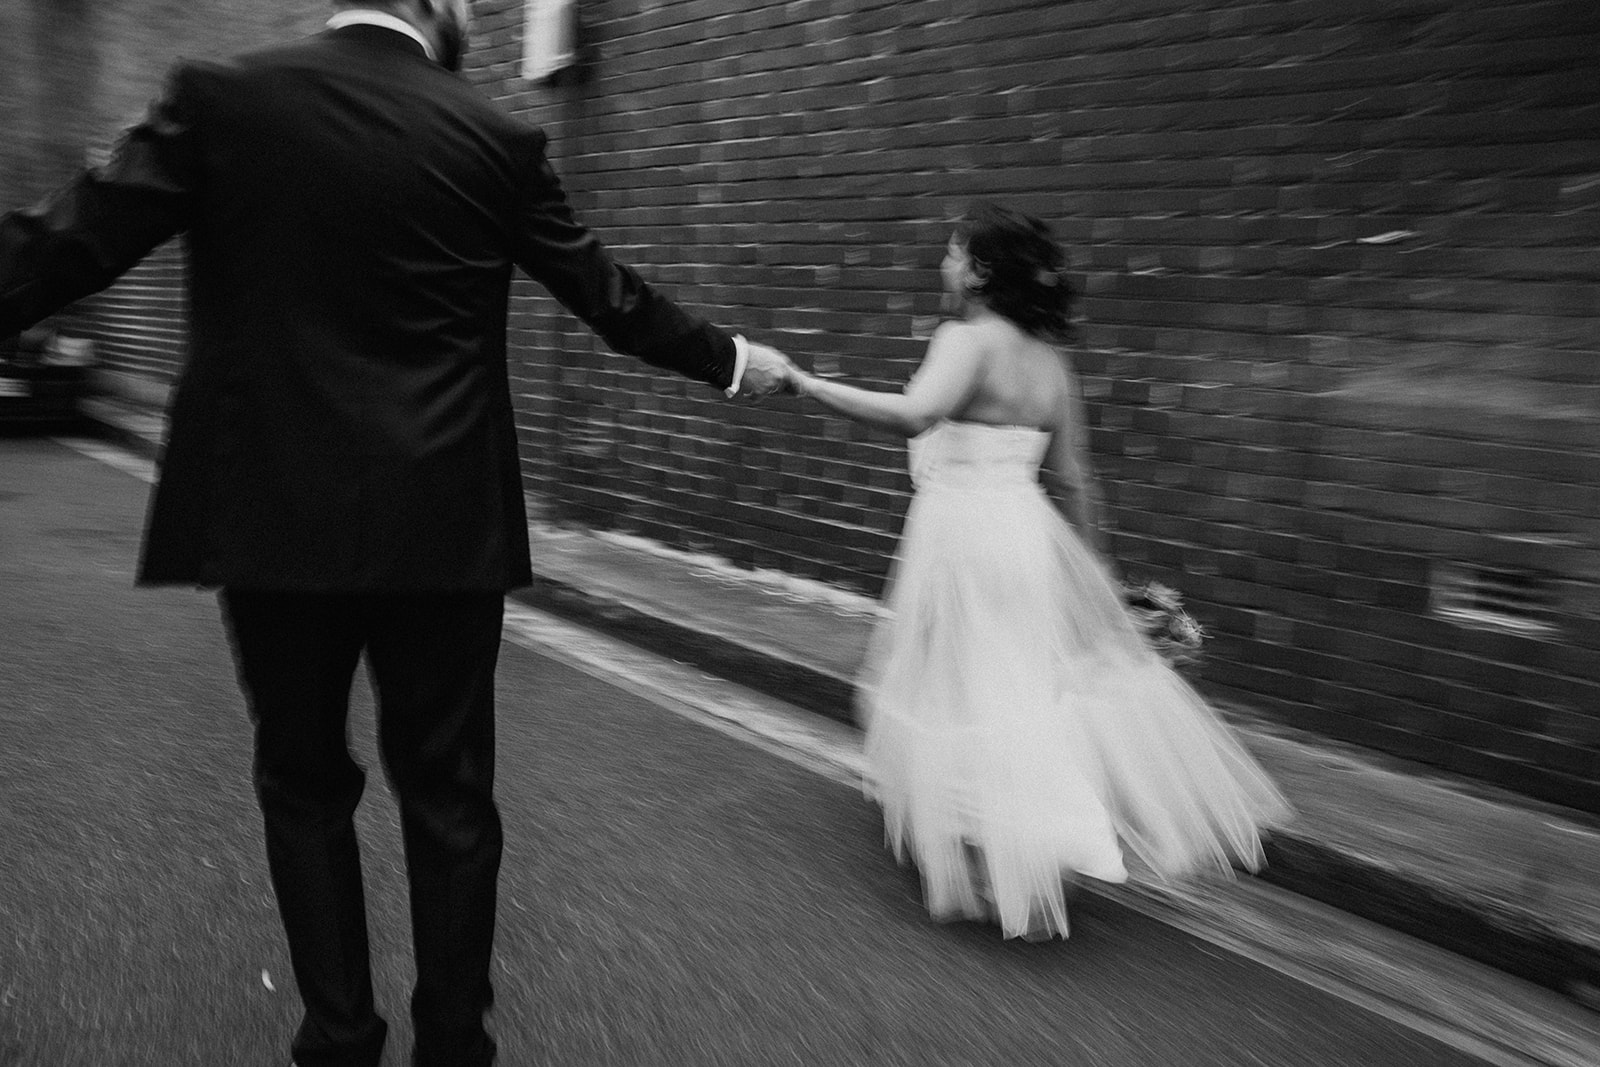 The bride and groom in a motion blur portrait